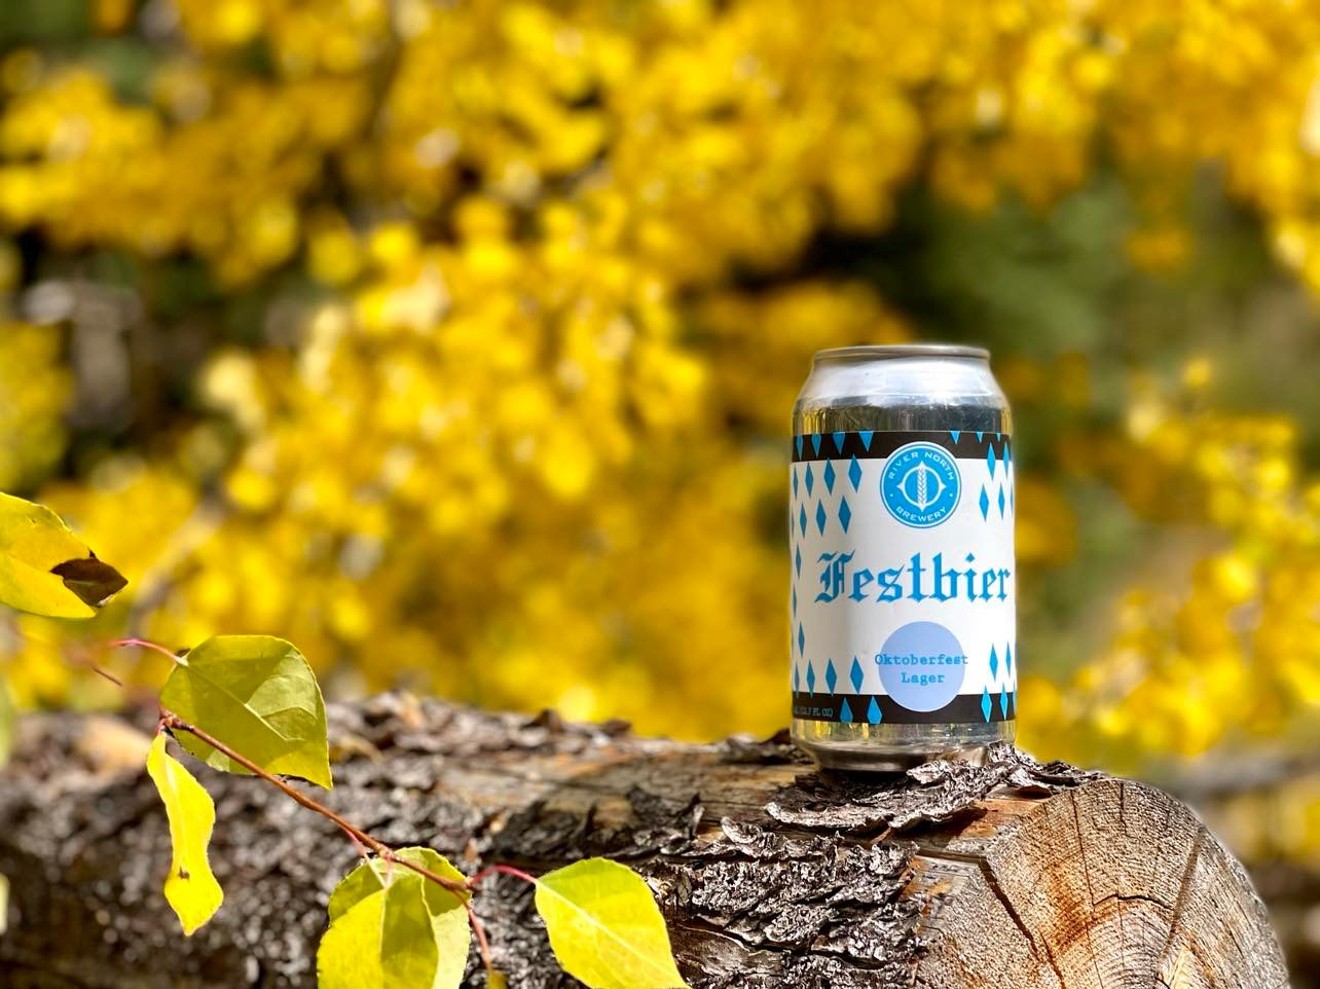 River North's Festbier is out now.